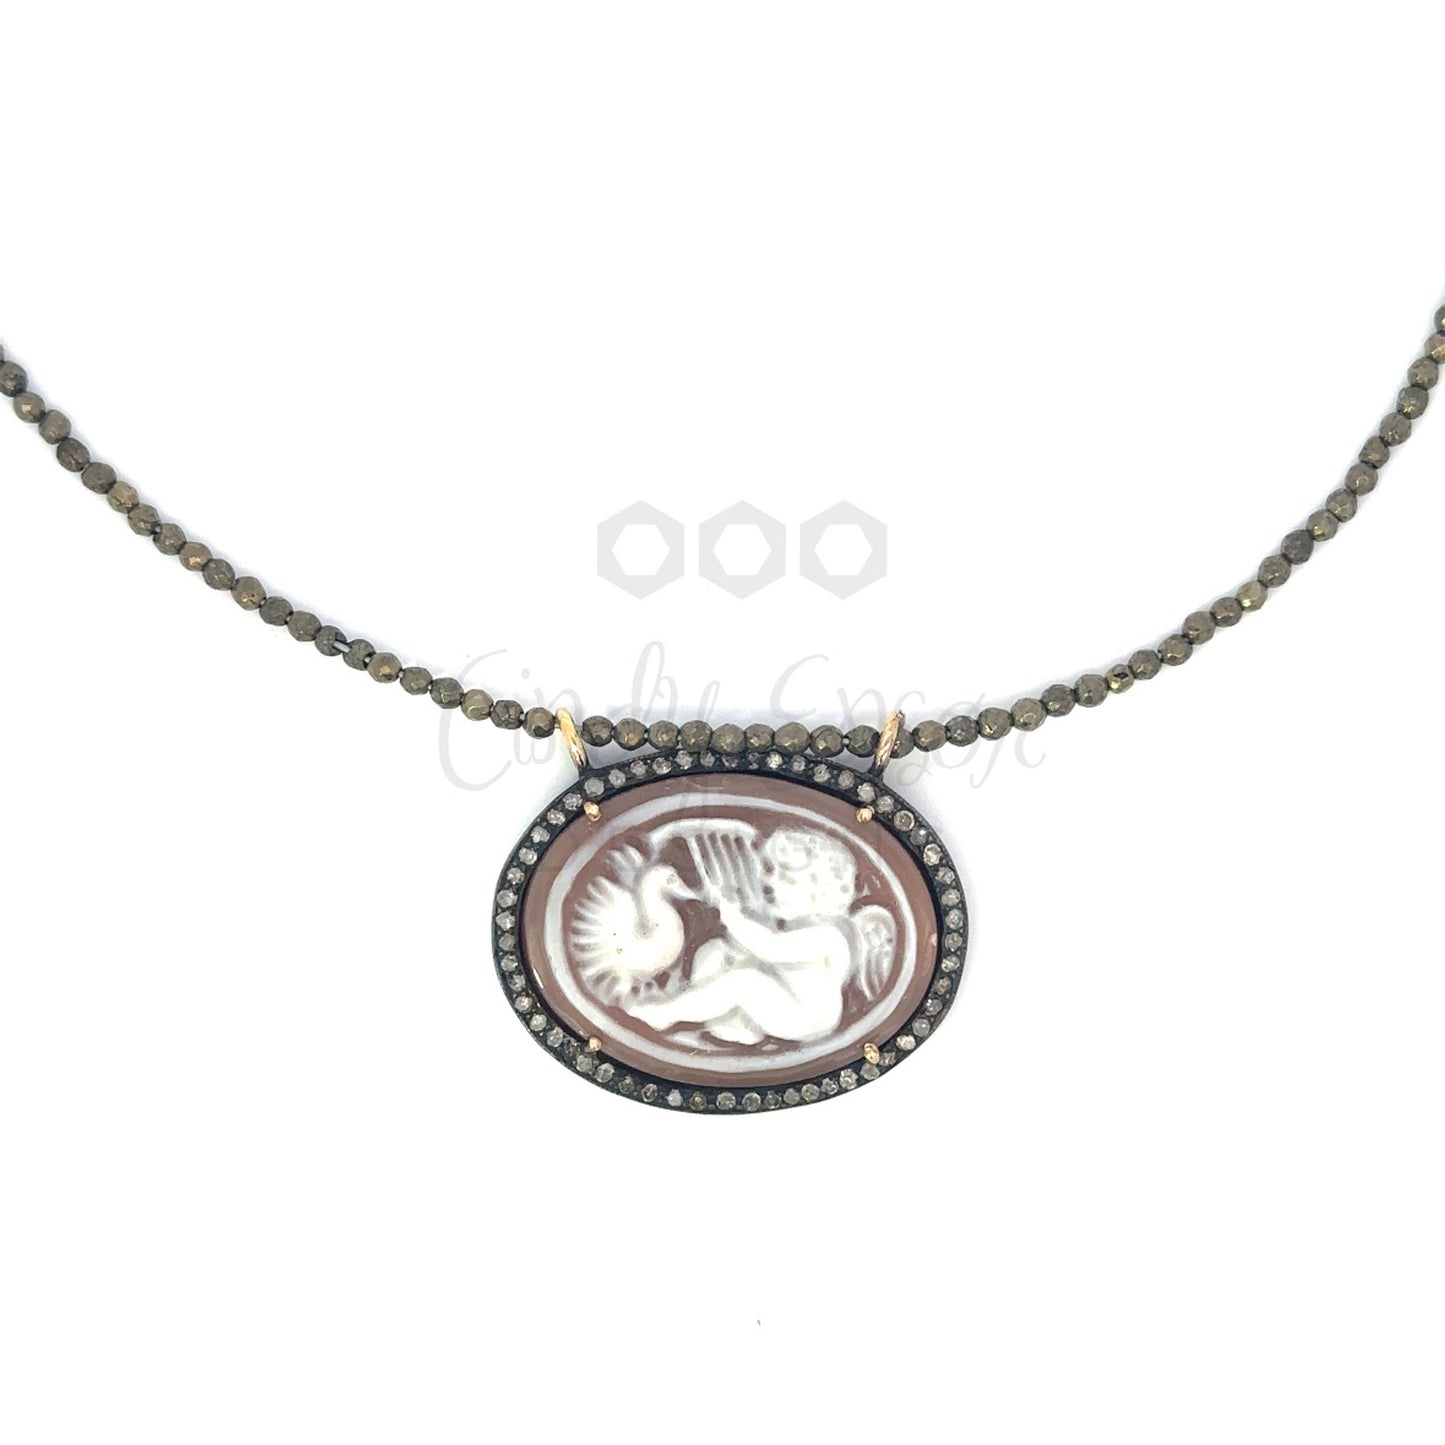 Cherub Oval Cameo Strung Pyrite Necklace with Pave Border